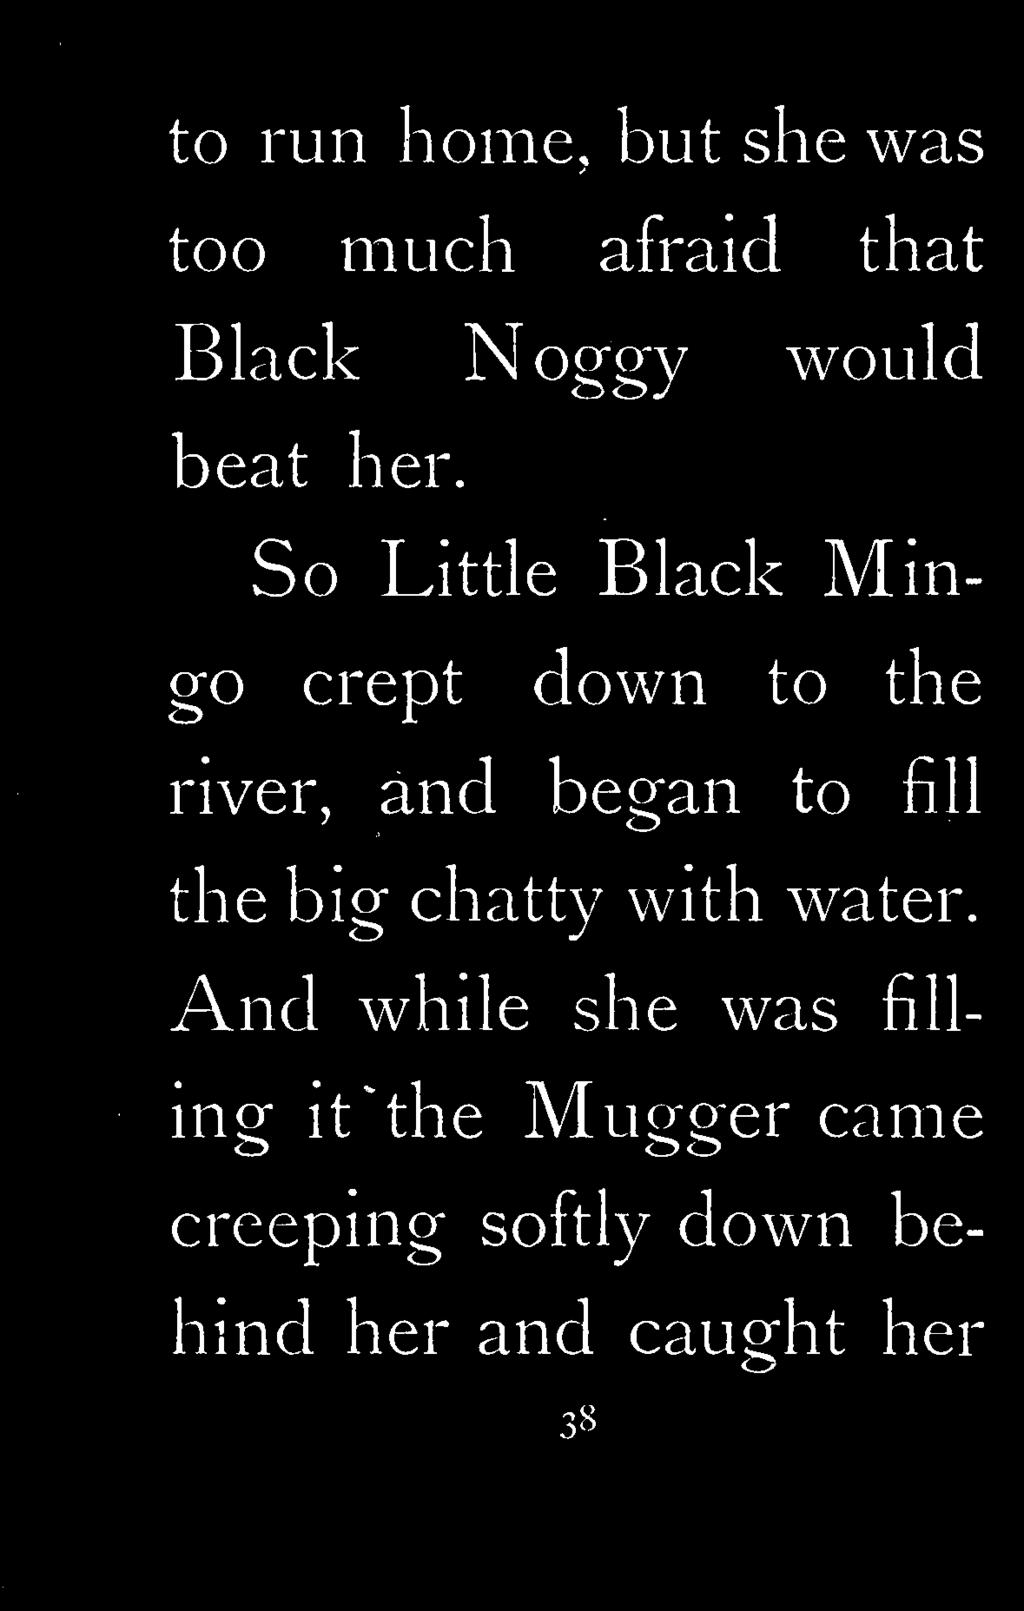 So Little Black Mingo crept down to the river, and began to fill